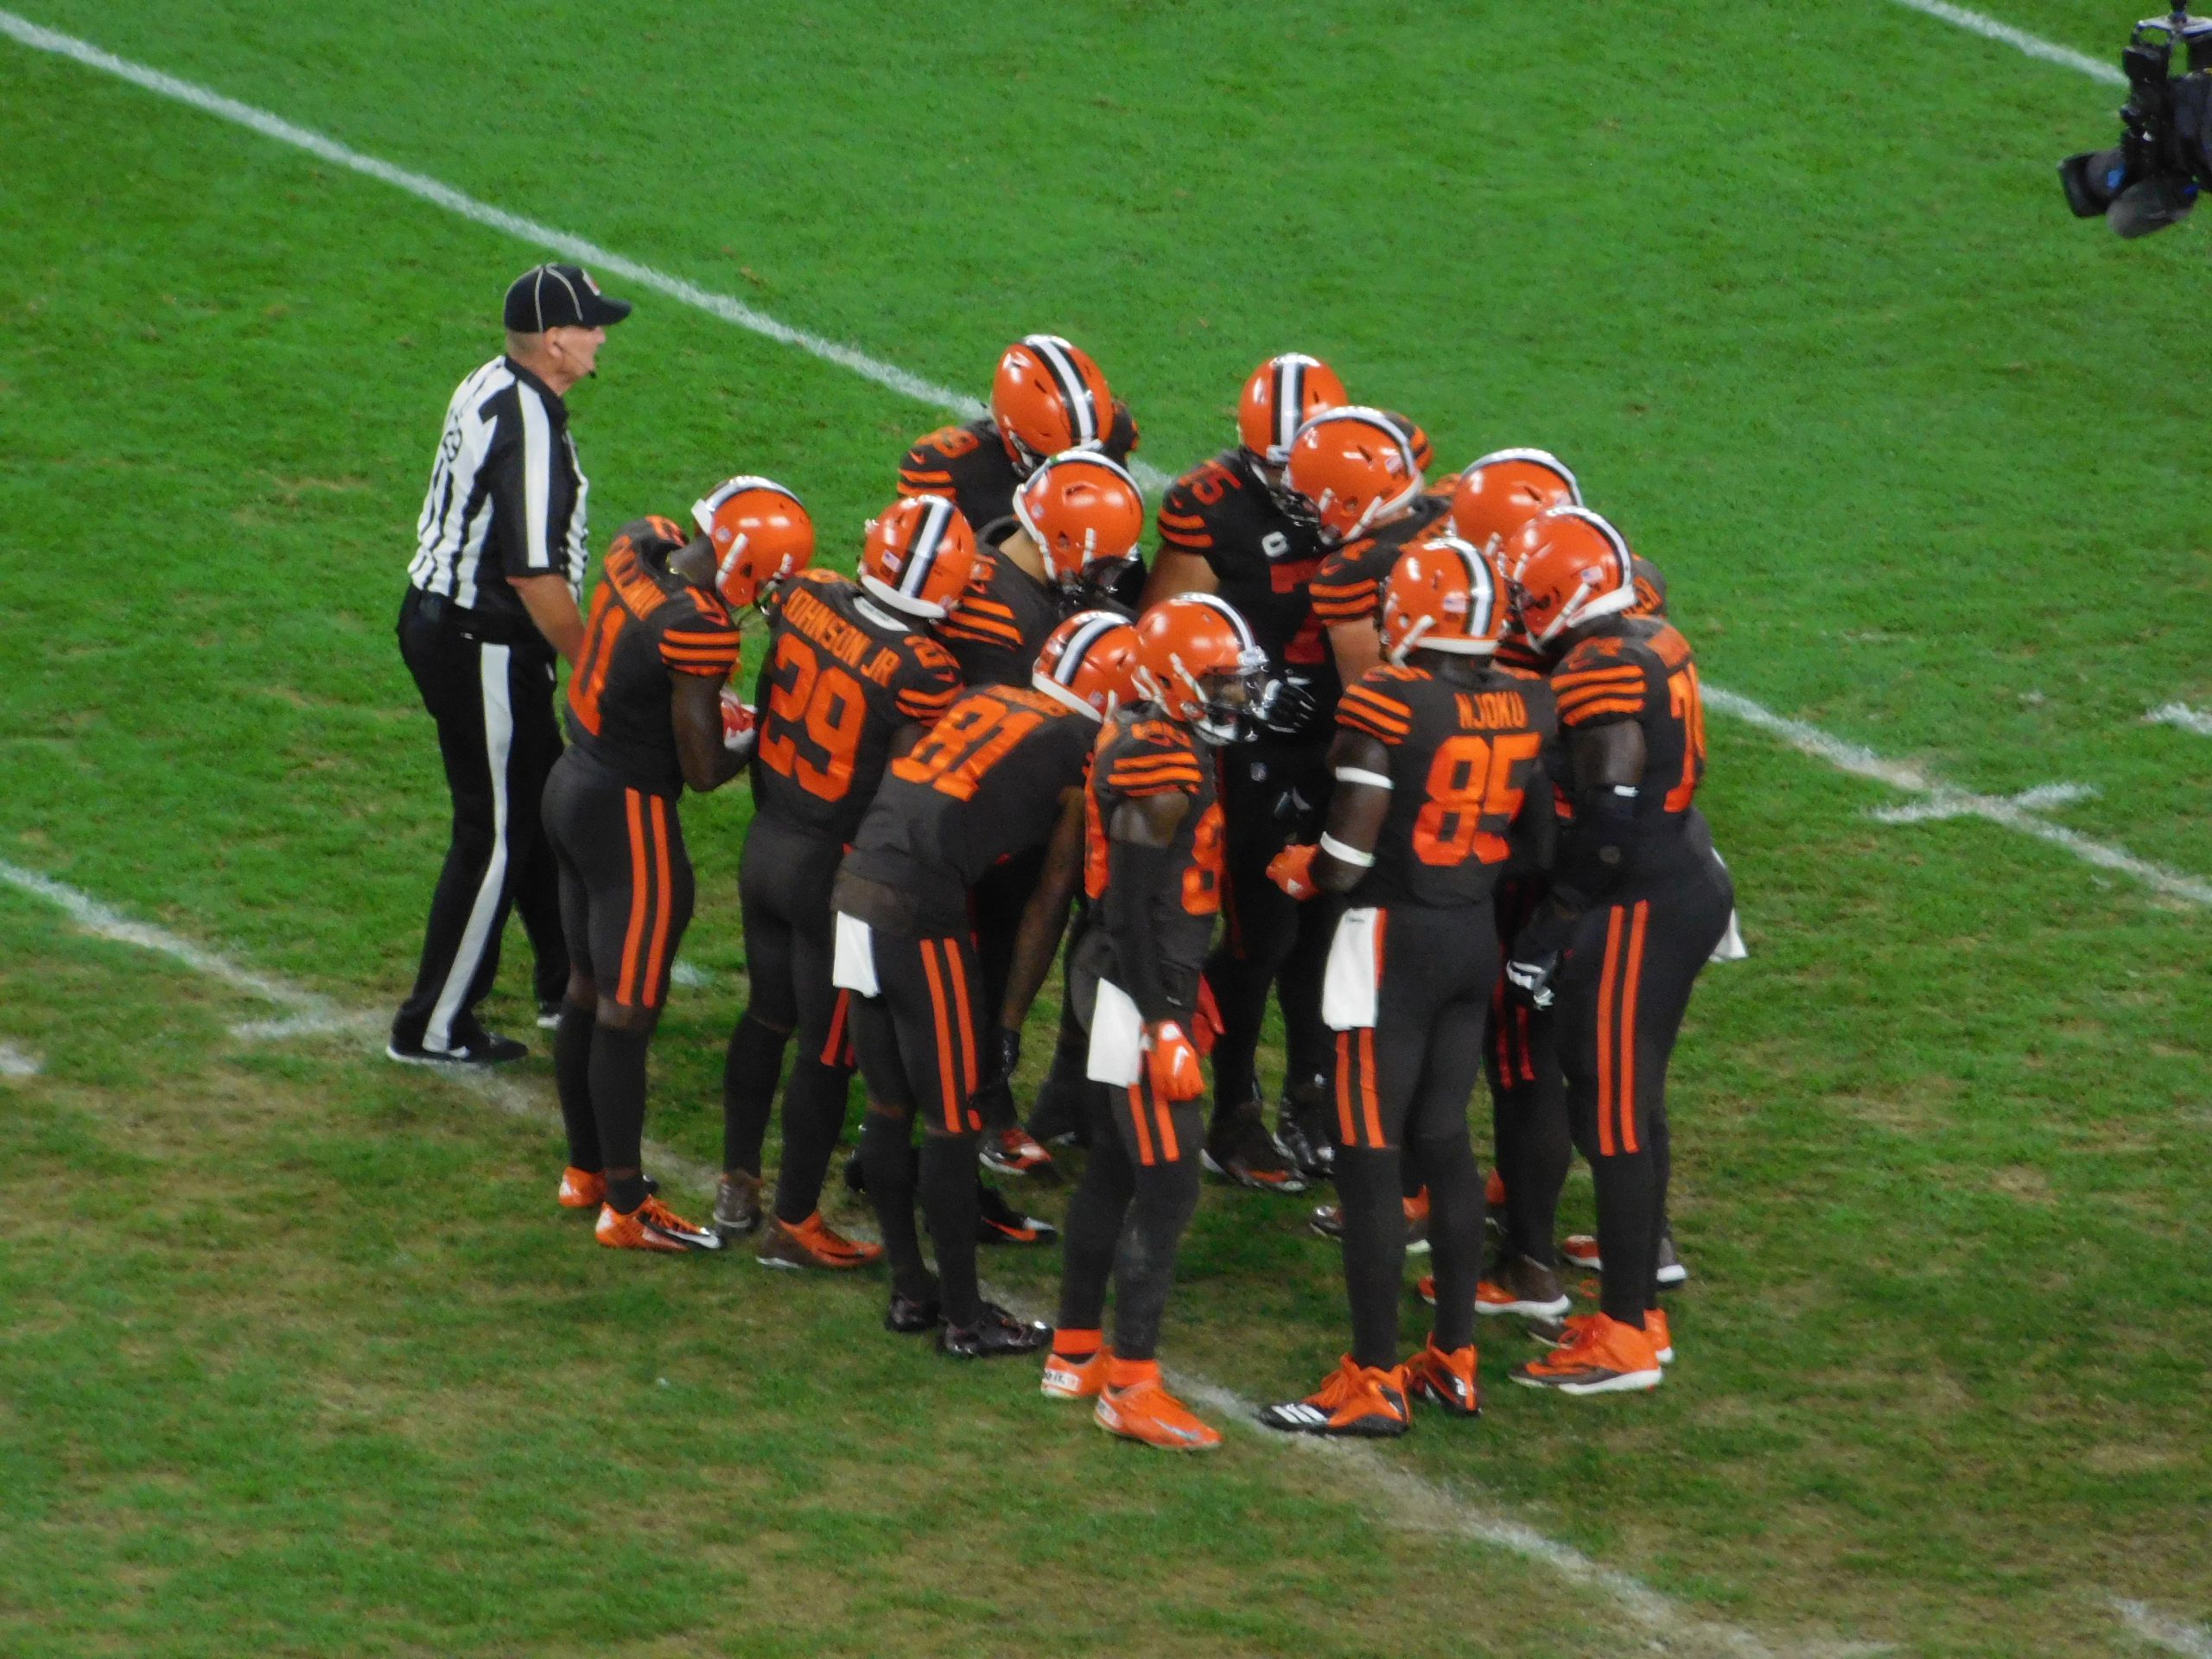 Browns color rush jerseys now the team's primary uniform